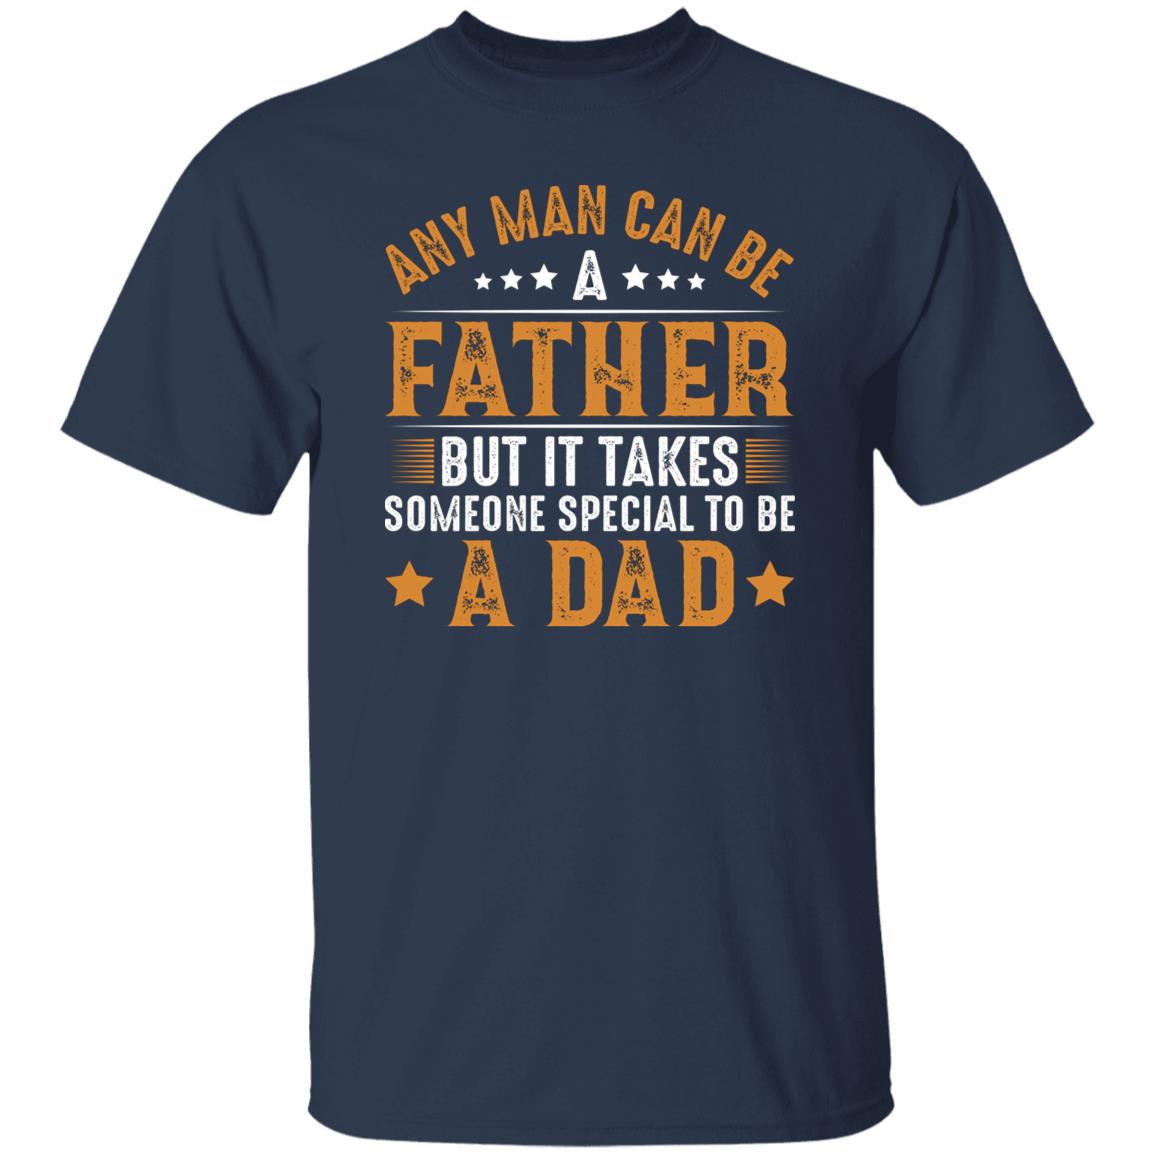 Any Man Can Be a Father T Shirt For Dad